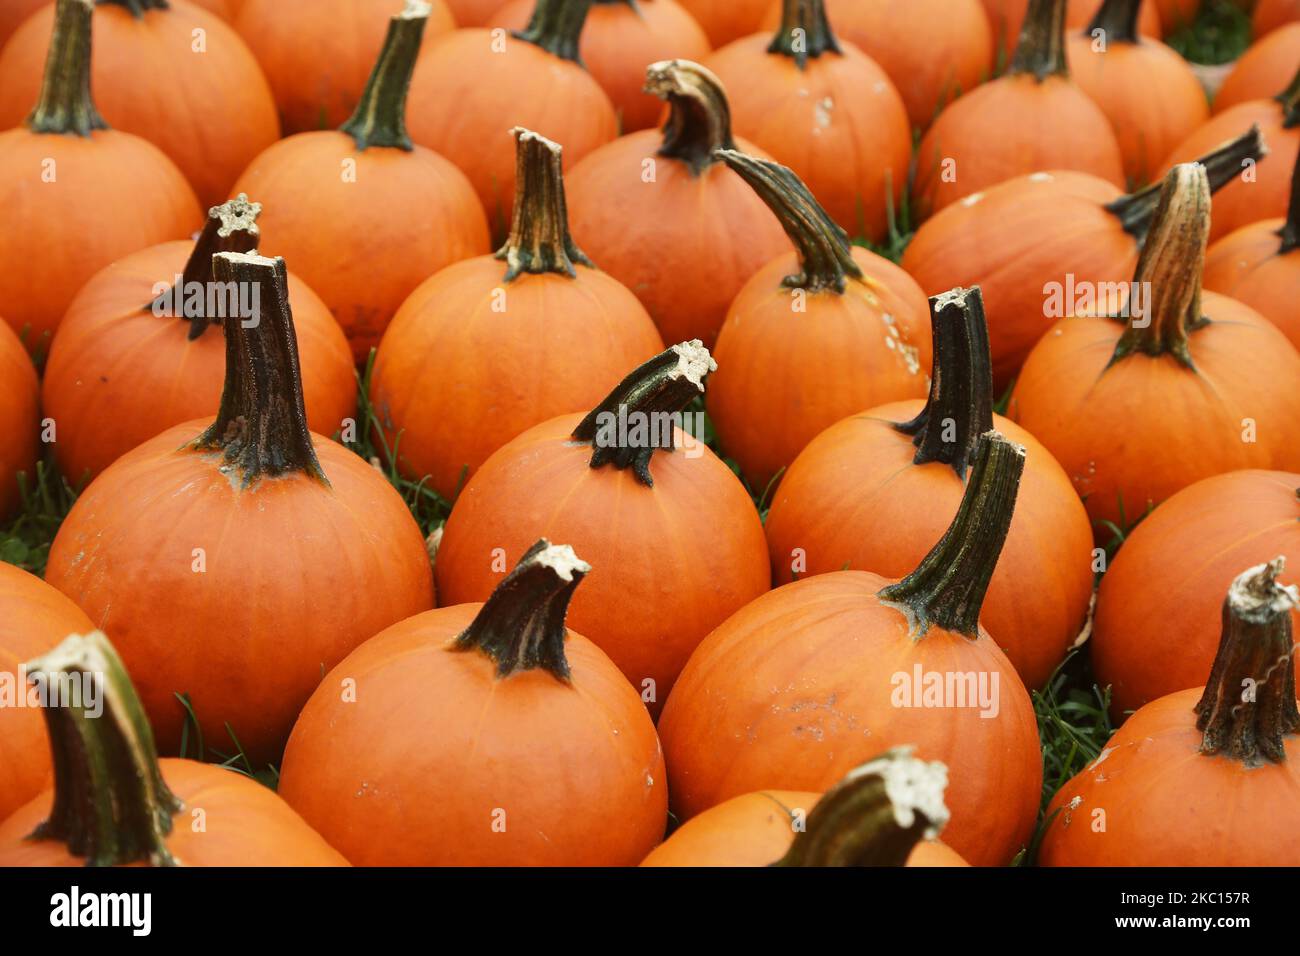 Small pumpkins at a farm during the novel coronavirus (COVID-19) pandemic in Markham, Ontario, Canada, on October 03, 2020. Cases of COVID-19 continue to rise, with record daily numbers across the Greater Toronto Area. Calls to place the city of Toronto back into lockdown to slow the spread of the virus are mounting from healthcare officials. (Photo by Creative Touch Imaging Ltd./NurPhoto) Stock Photo